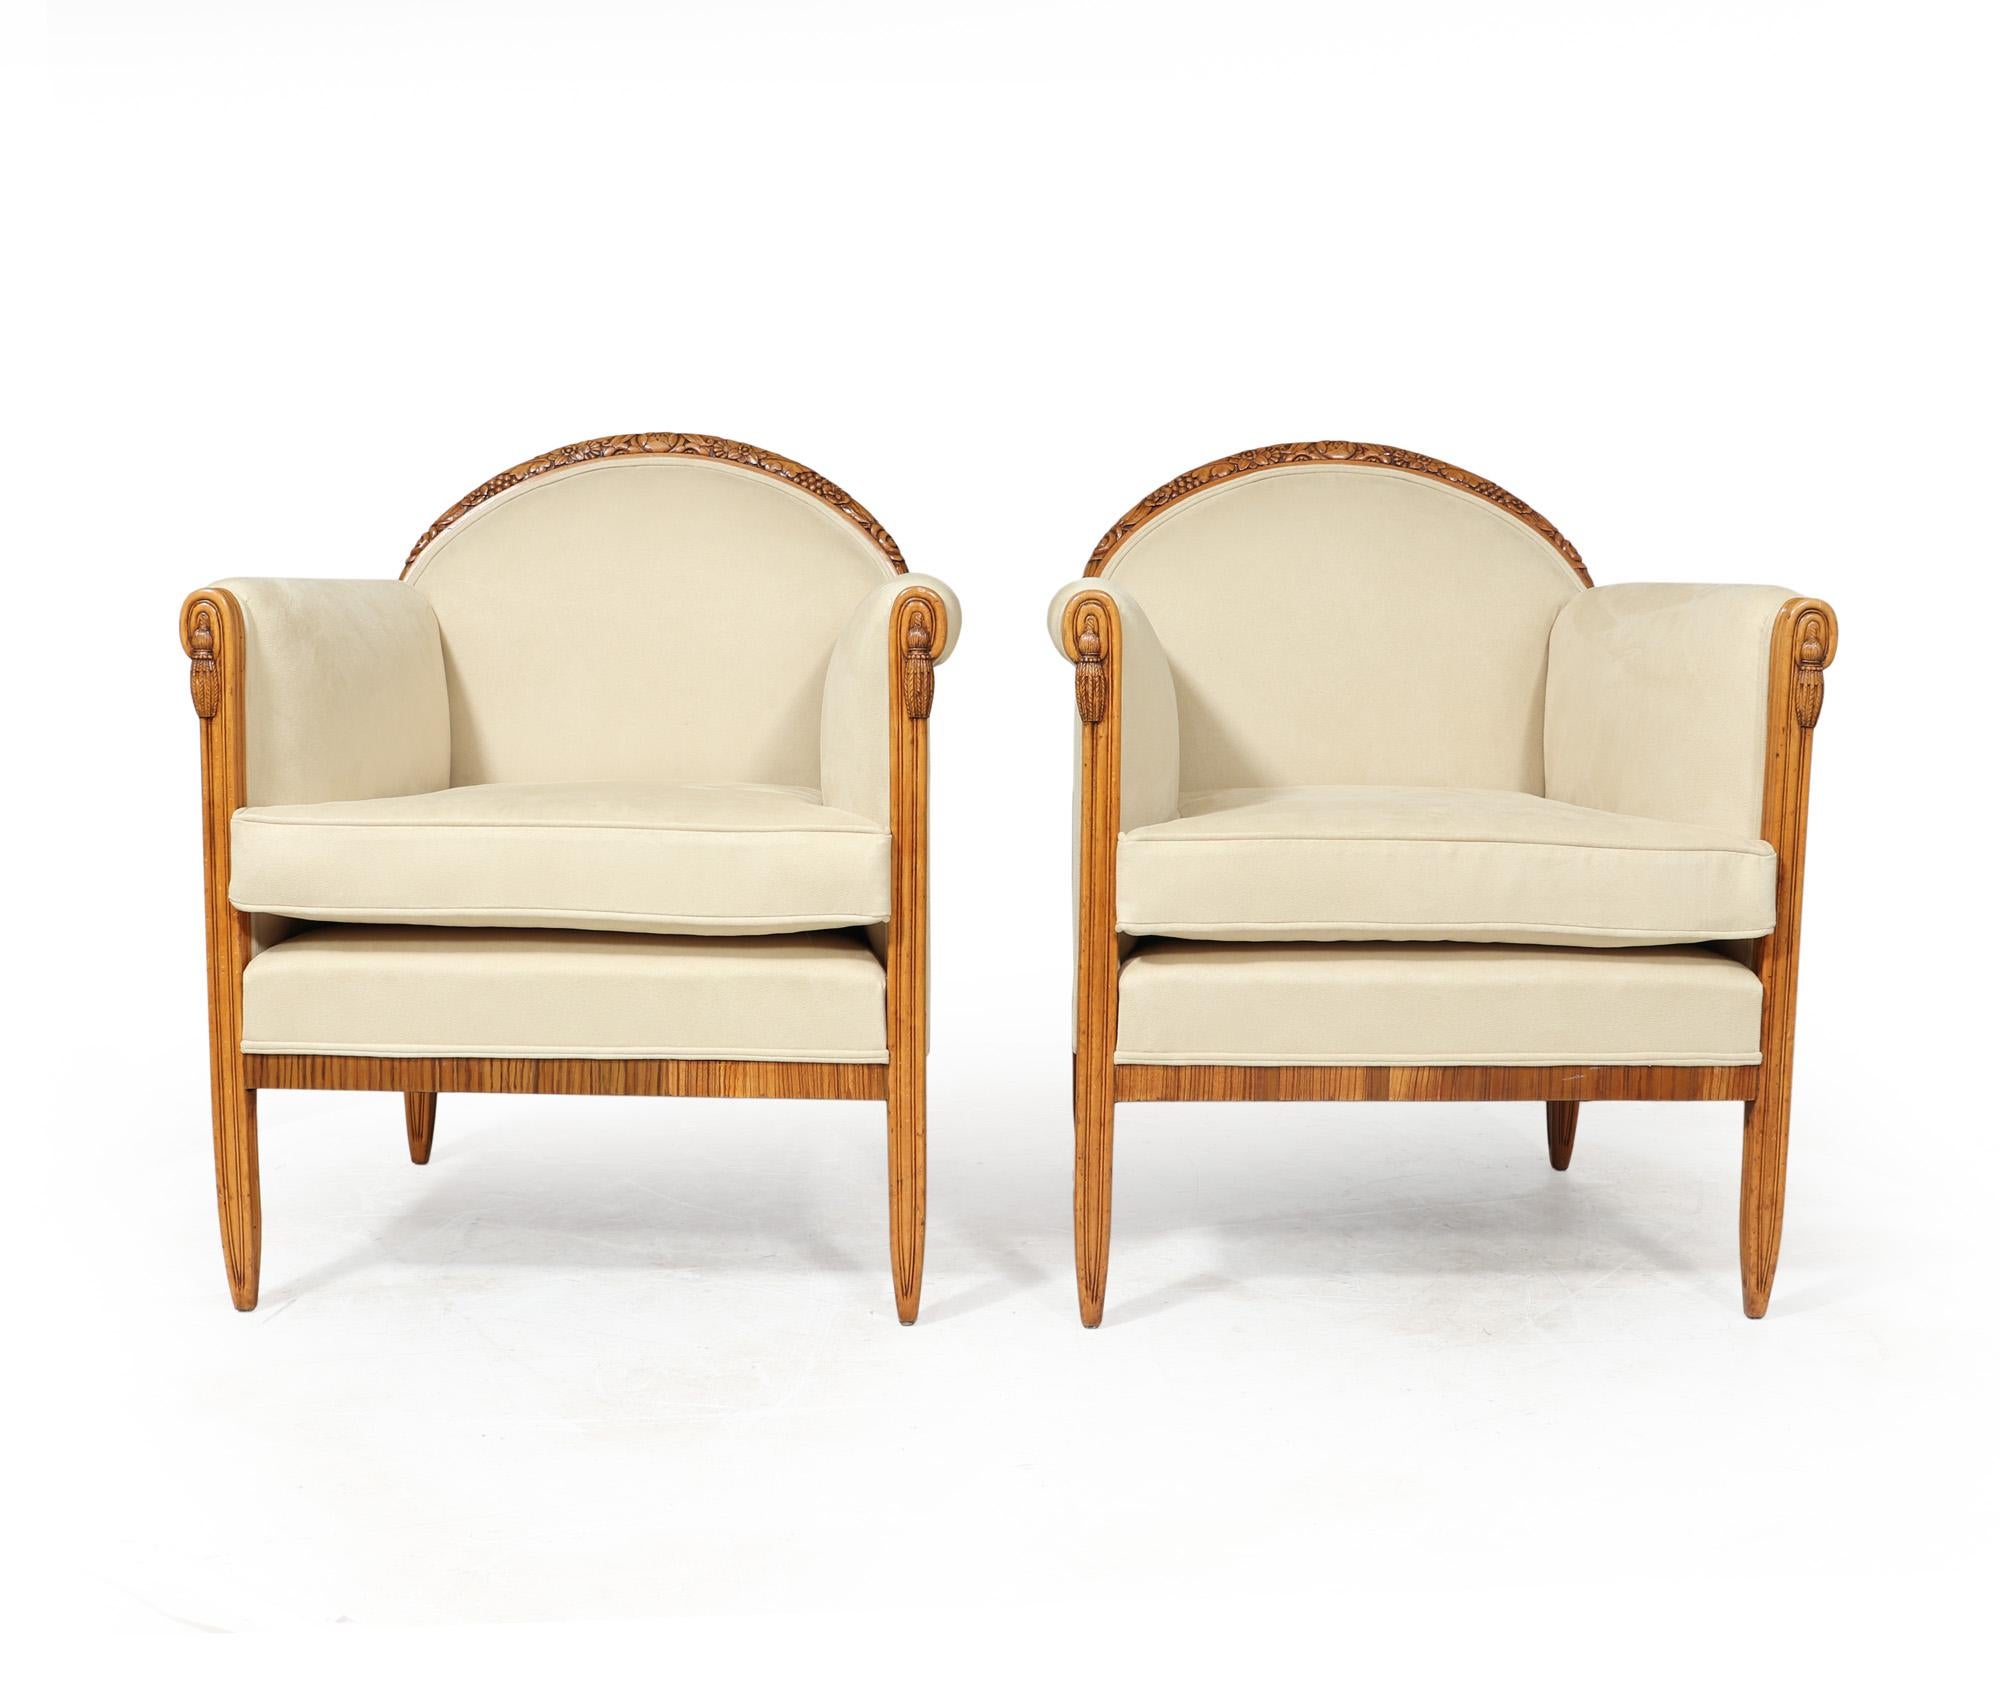 ARMCHAIRS BY PAUL FOLLOT
A Pair of armchairs in beech with zebrano detail, crisply carved with a very classic French Art Deco form, designed and produced by one of the Masters of the Art Deco period, Paul Follot having a floral curved top edge and